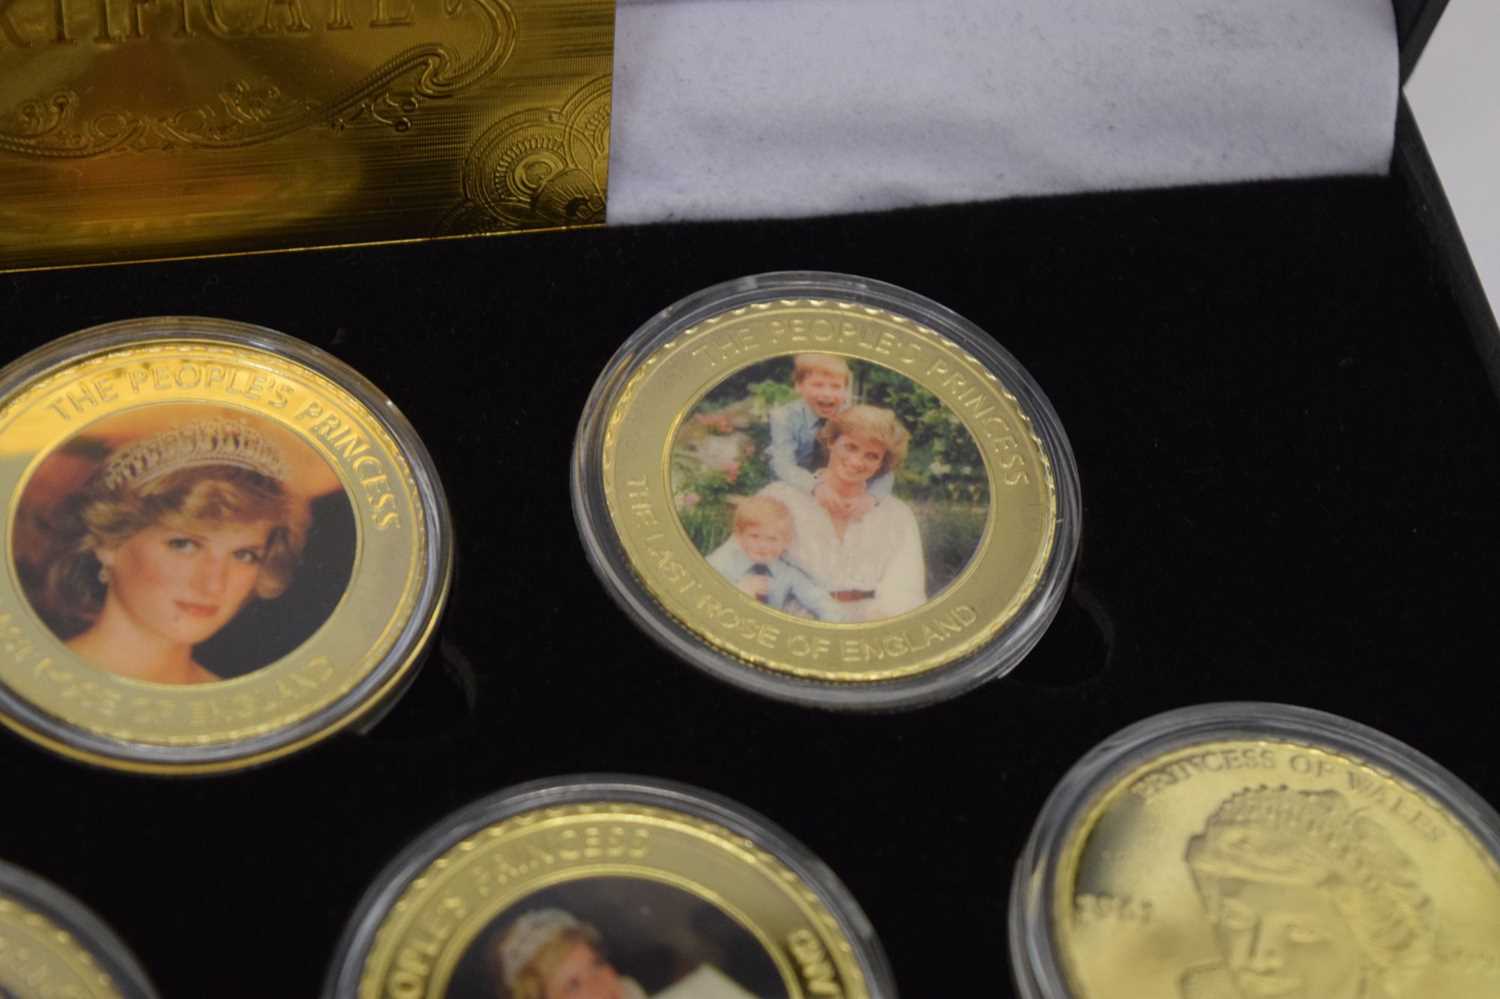 Gold plated limited edition ten coin set commemorating the life of Princess of Wales - Image 5 of 6